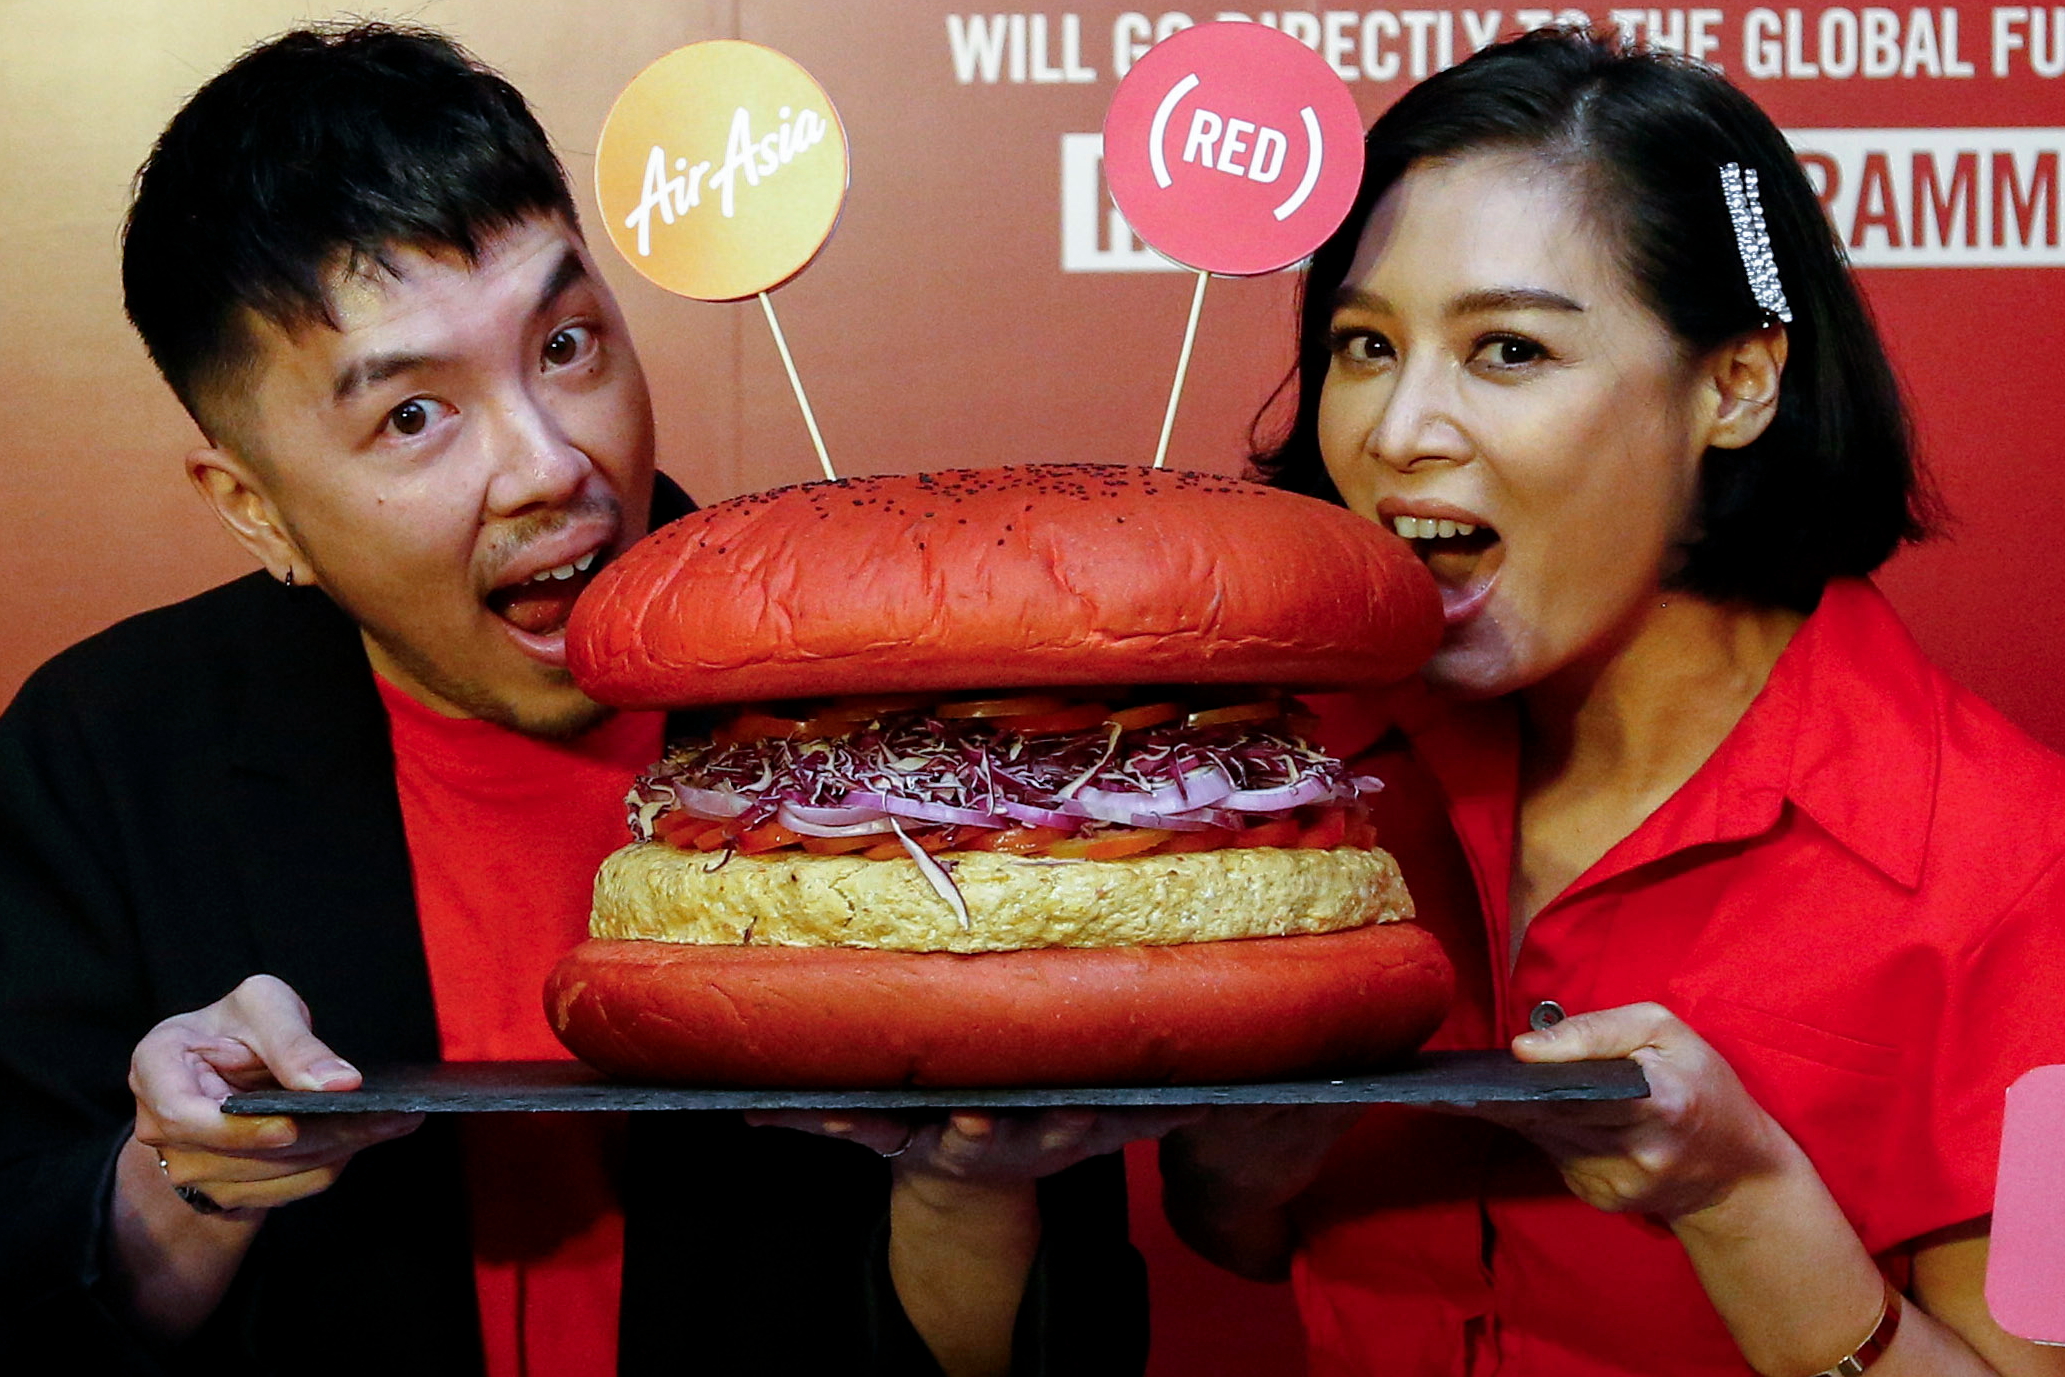 AirAsia has expanded its inflight menu with an INSPI(RED) Burger, sales of which will help the fight against AIDS across the ASEAN region. For every burger sold, 10% of the sales will go to the Global Fund to support HIV/AIDS testing, counselling, treatment and prevention programmes in the region. Click to enlarge.